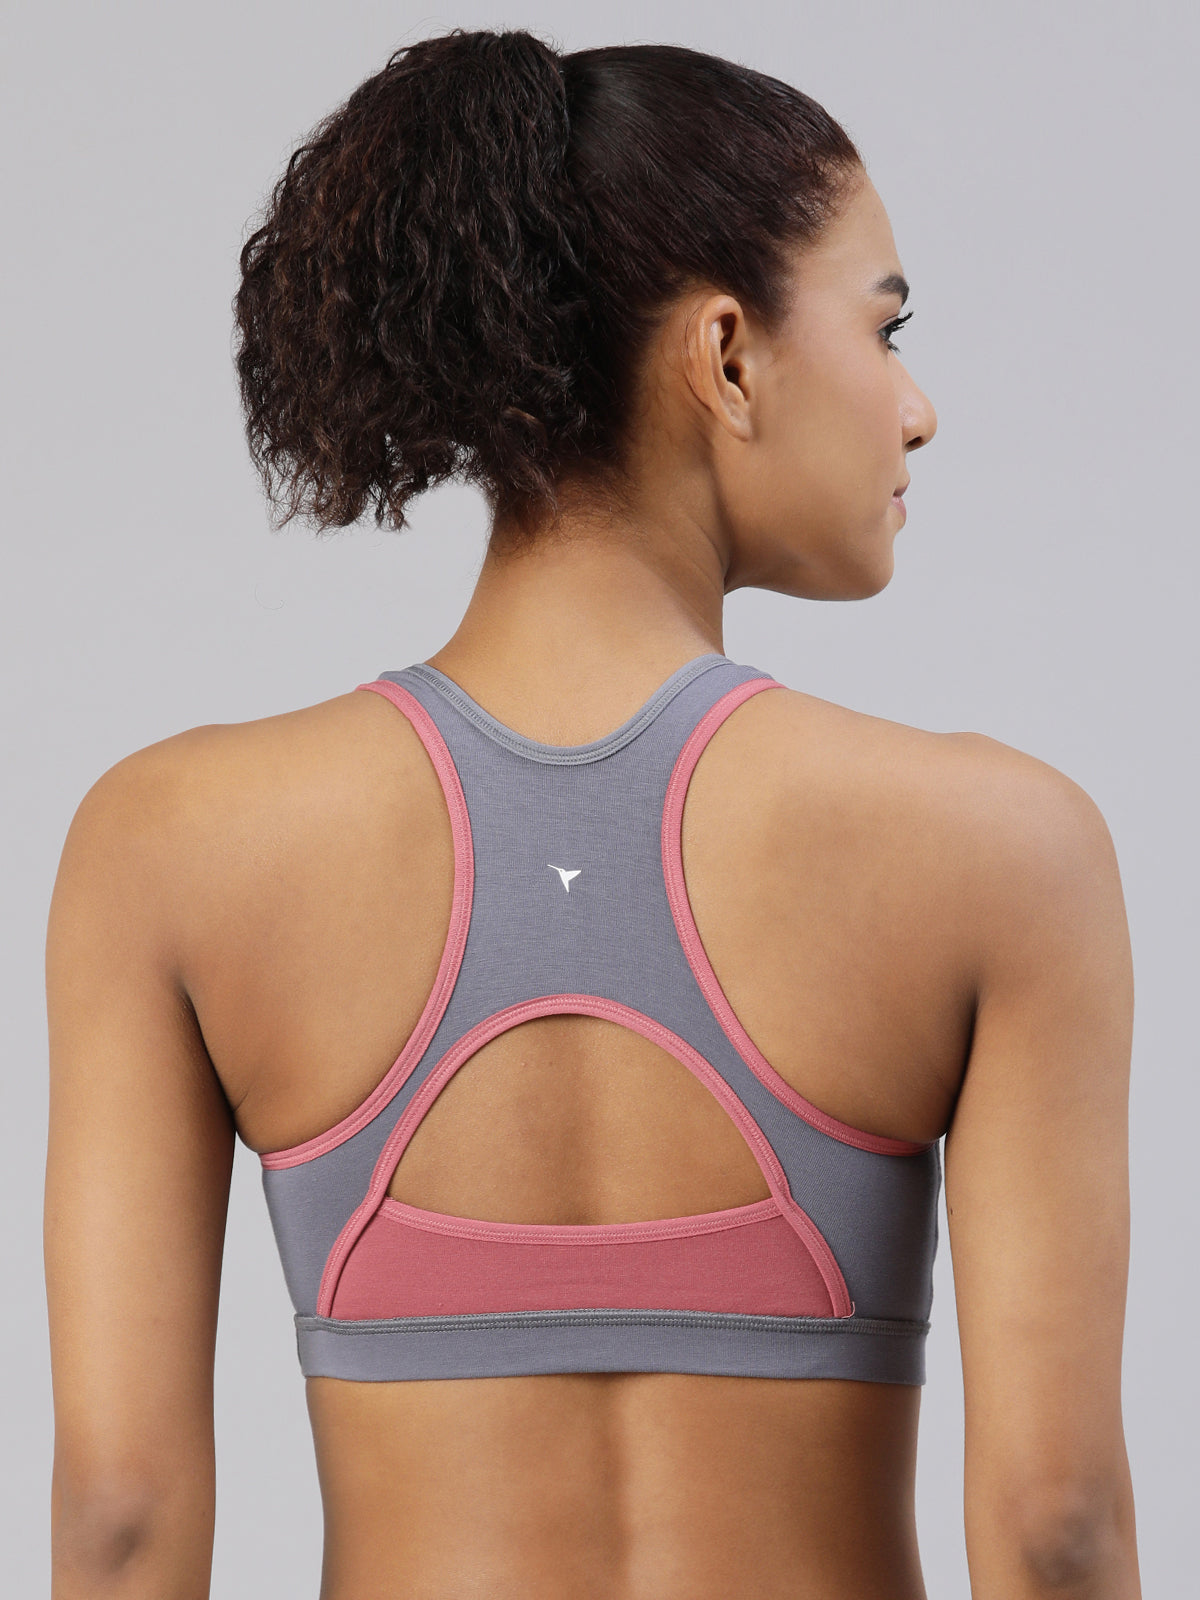 blossom-workout bra-silver grey red3-Sports collection-utility based bra